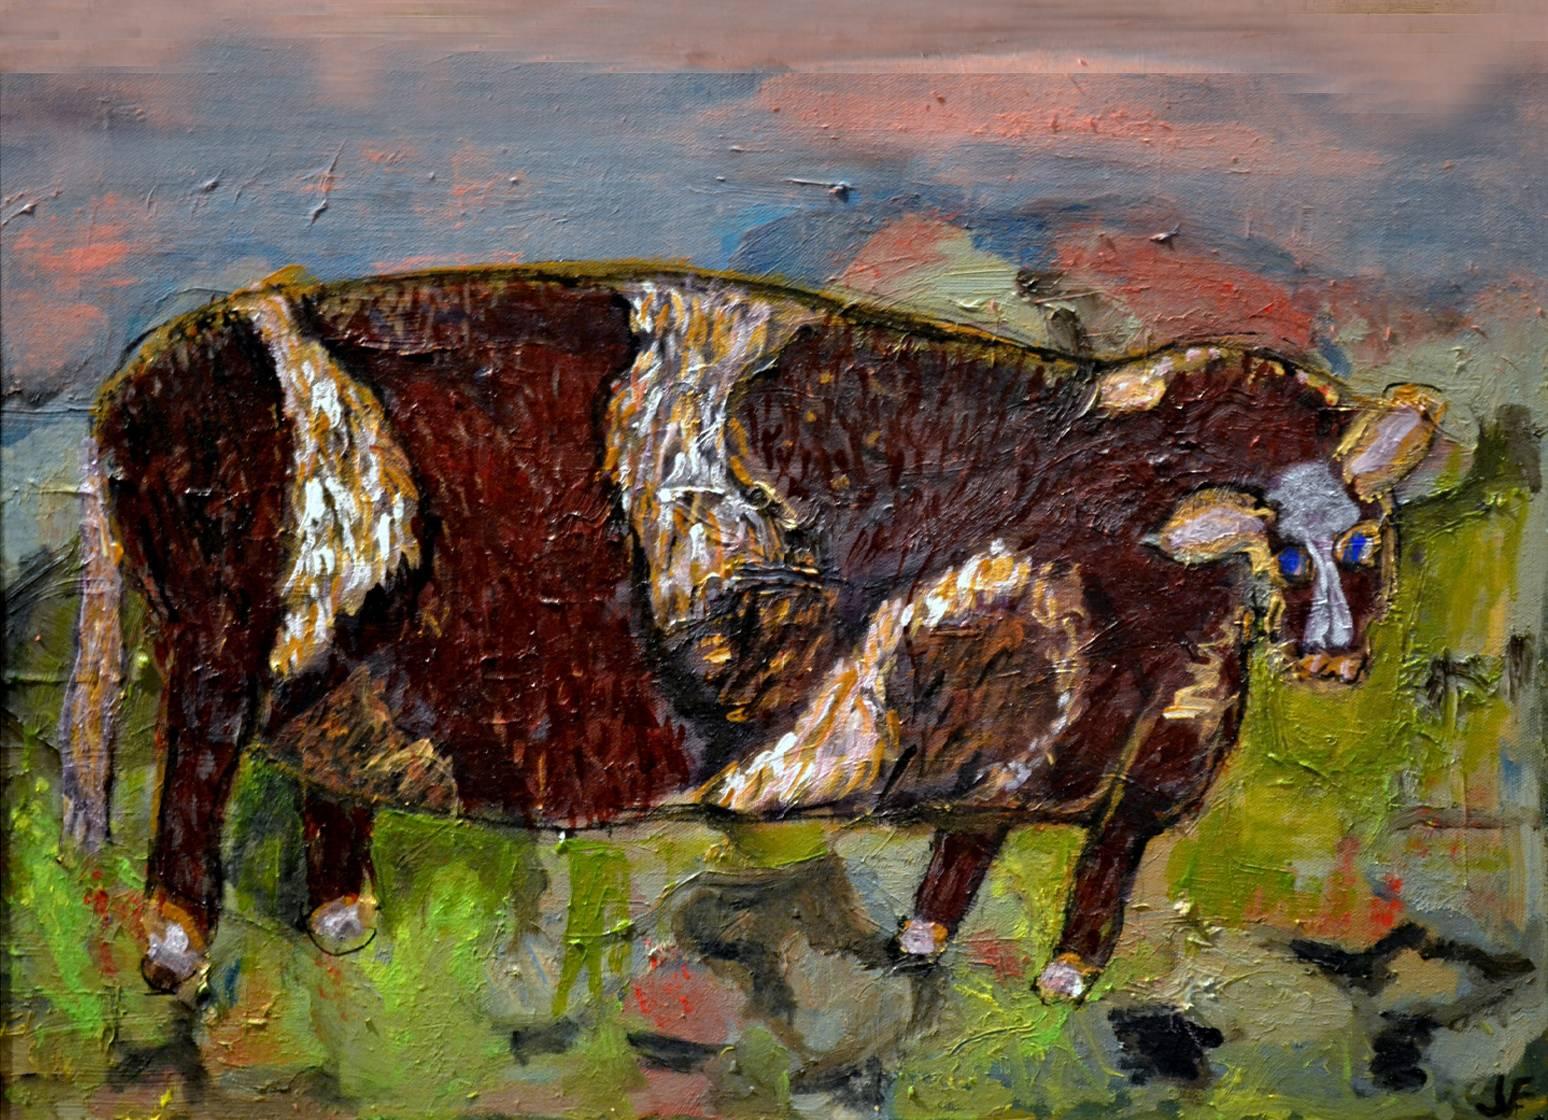 California artist JoAnne Fleming (b. 1930), known for her colorful expressionist portraits of women, is equally known for her often whimsical and colorful portraits of animals, particularly cows and horses. 

This portrait of a cow is particularly